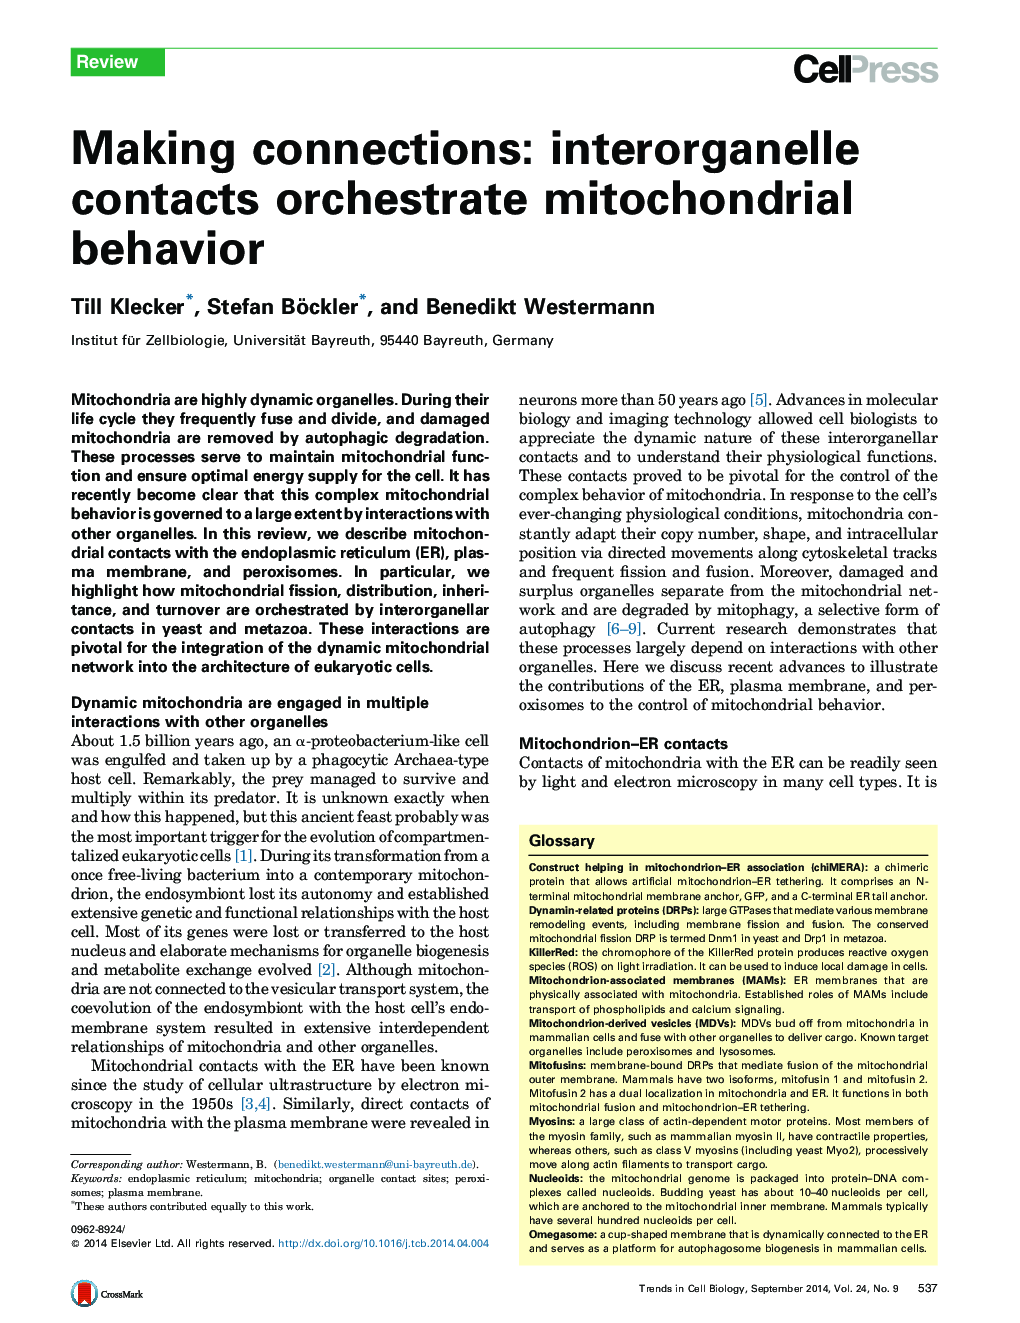 Making connections: interorganelle contacts orchestrate mitochondrial behavior